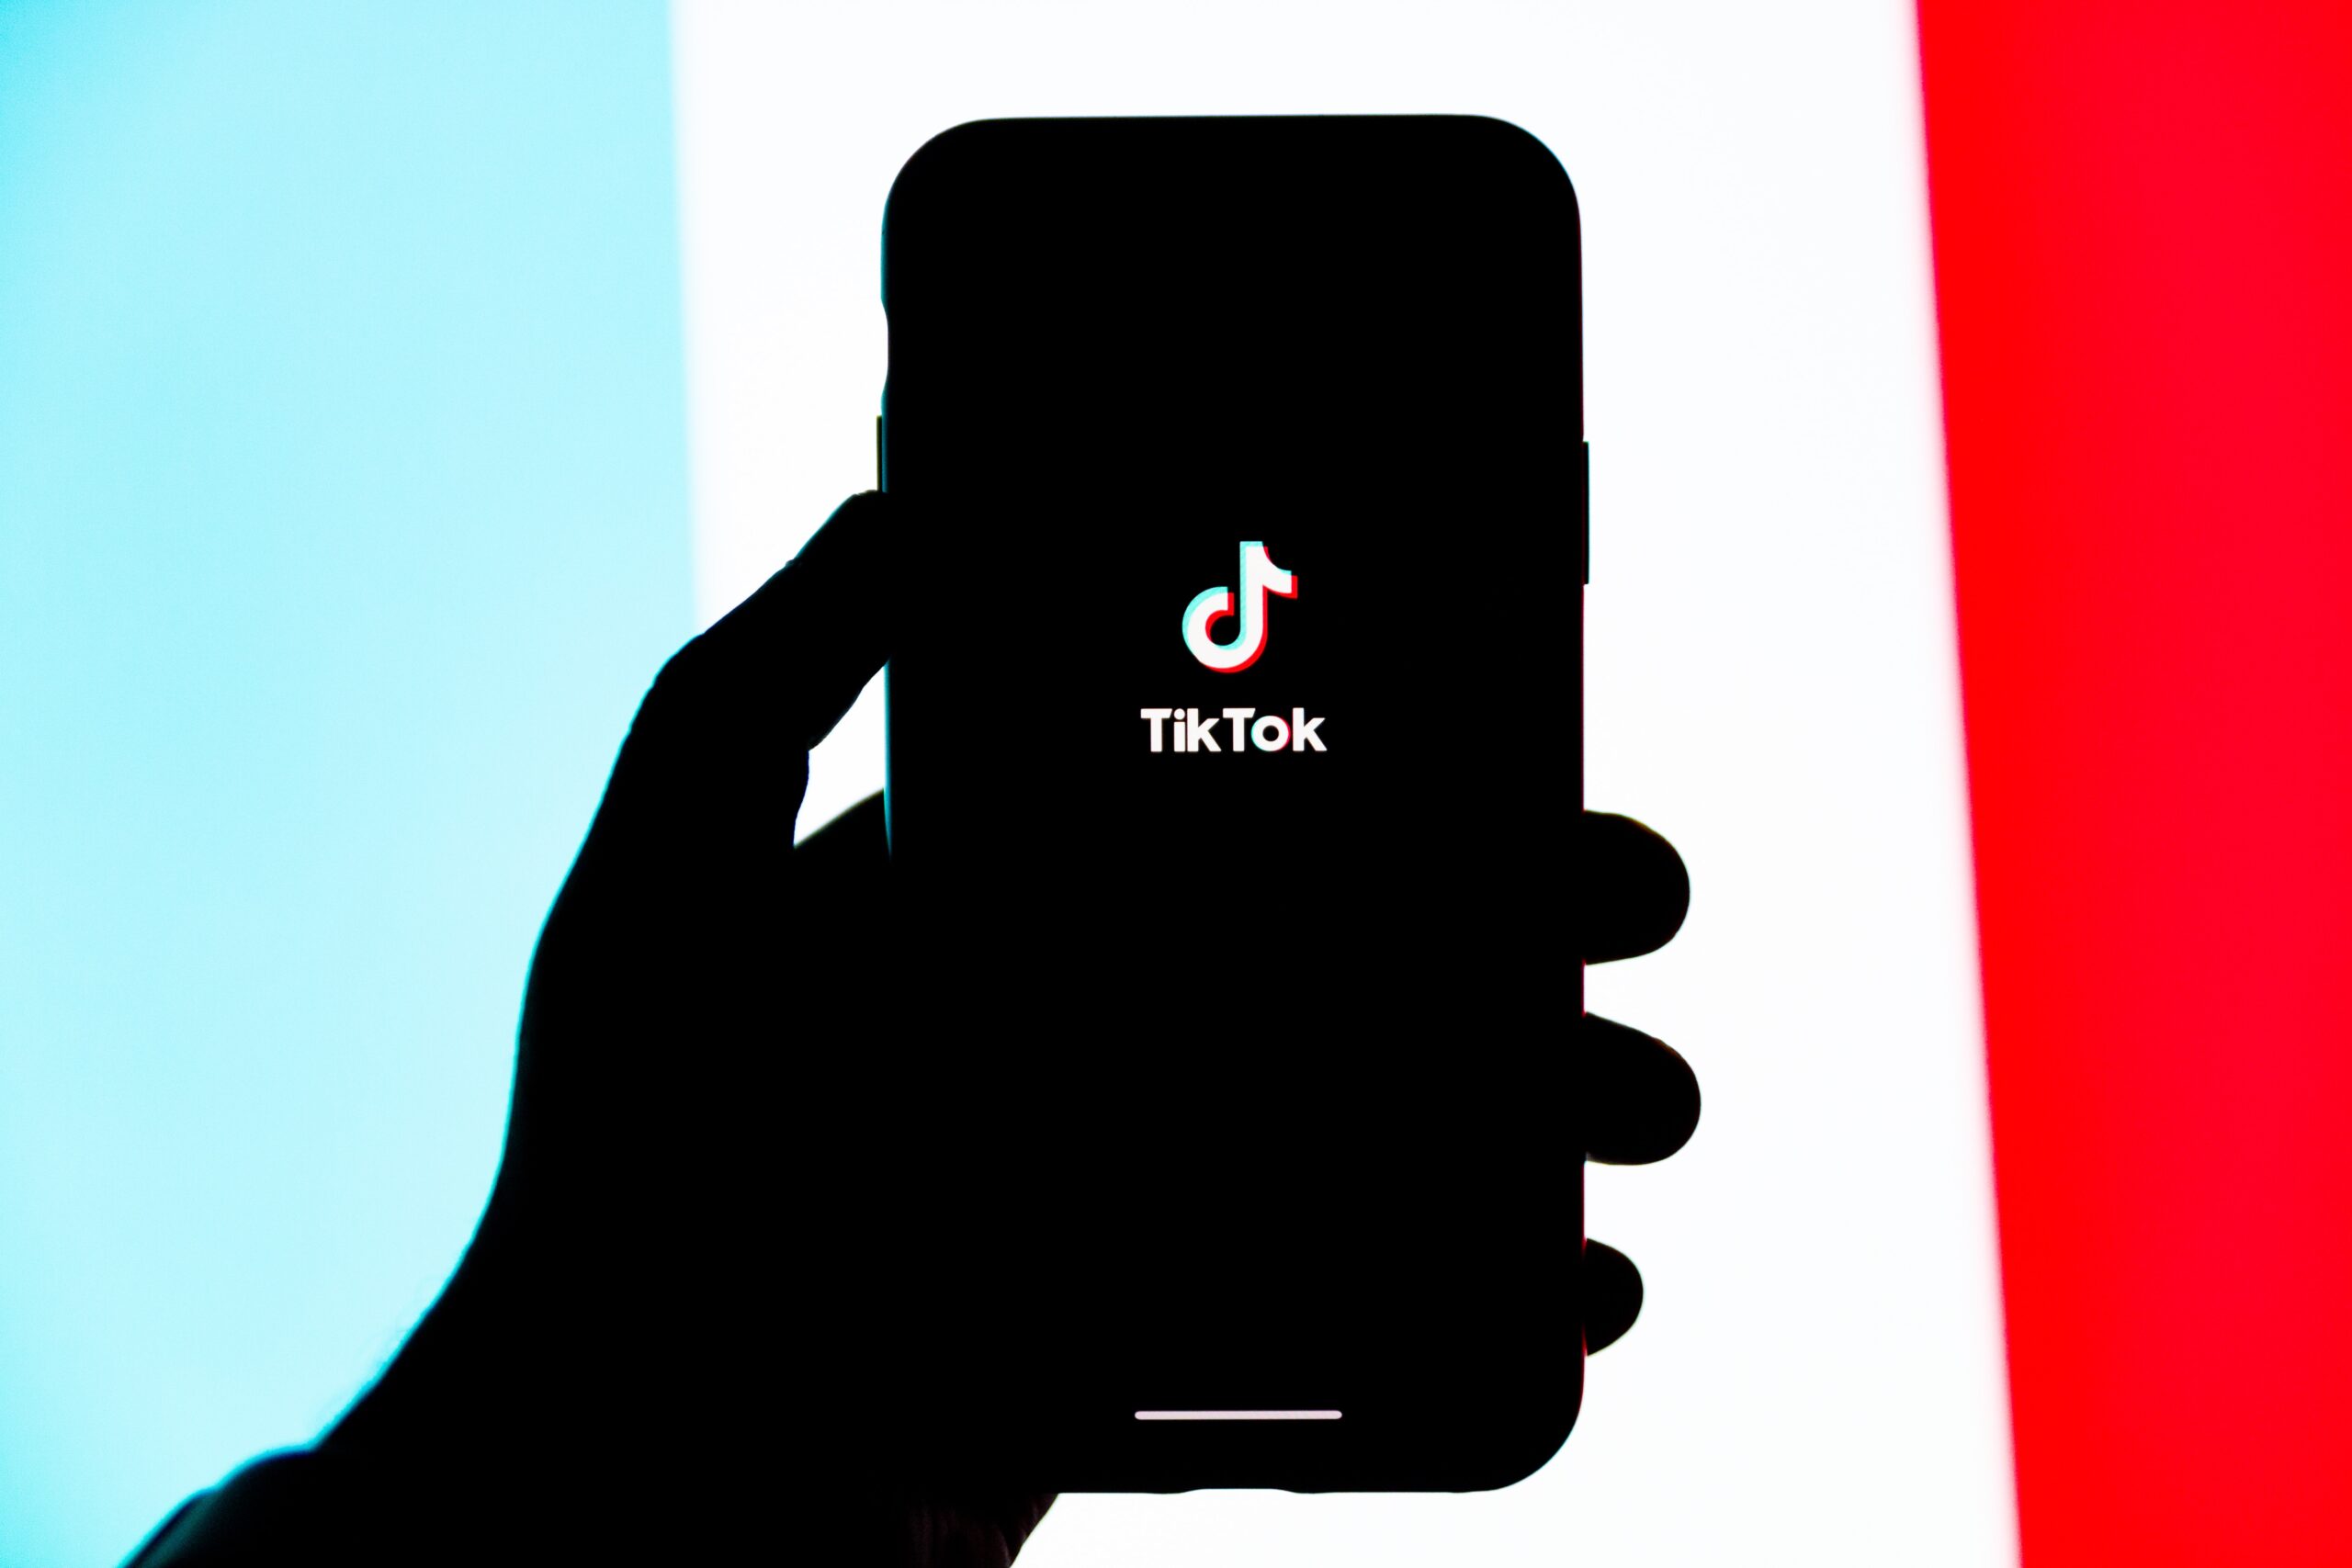 TikTok Shop gears up for expansion in pre-owned luxury market